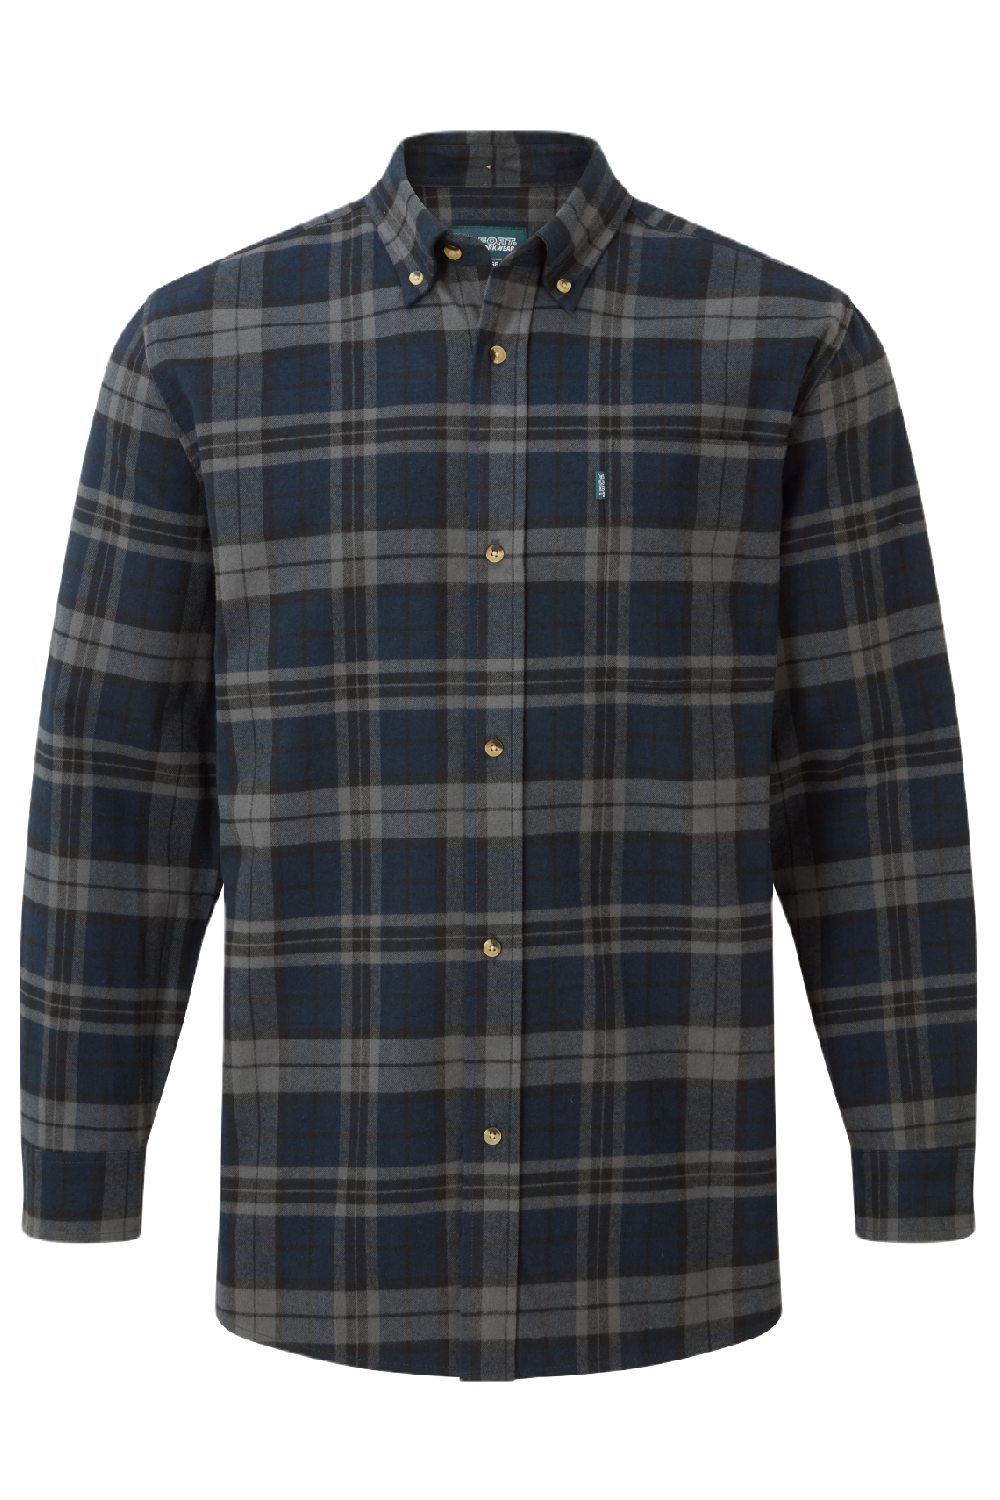 Fort Hyde Shirt in Navy Blue